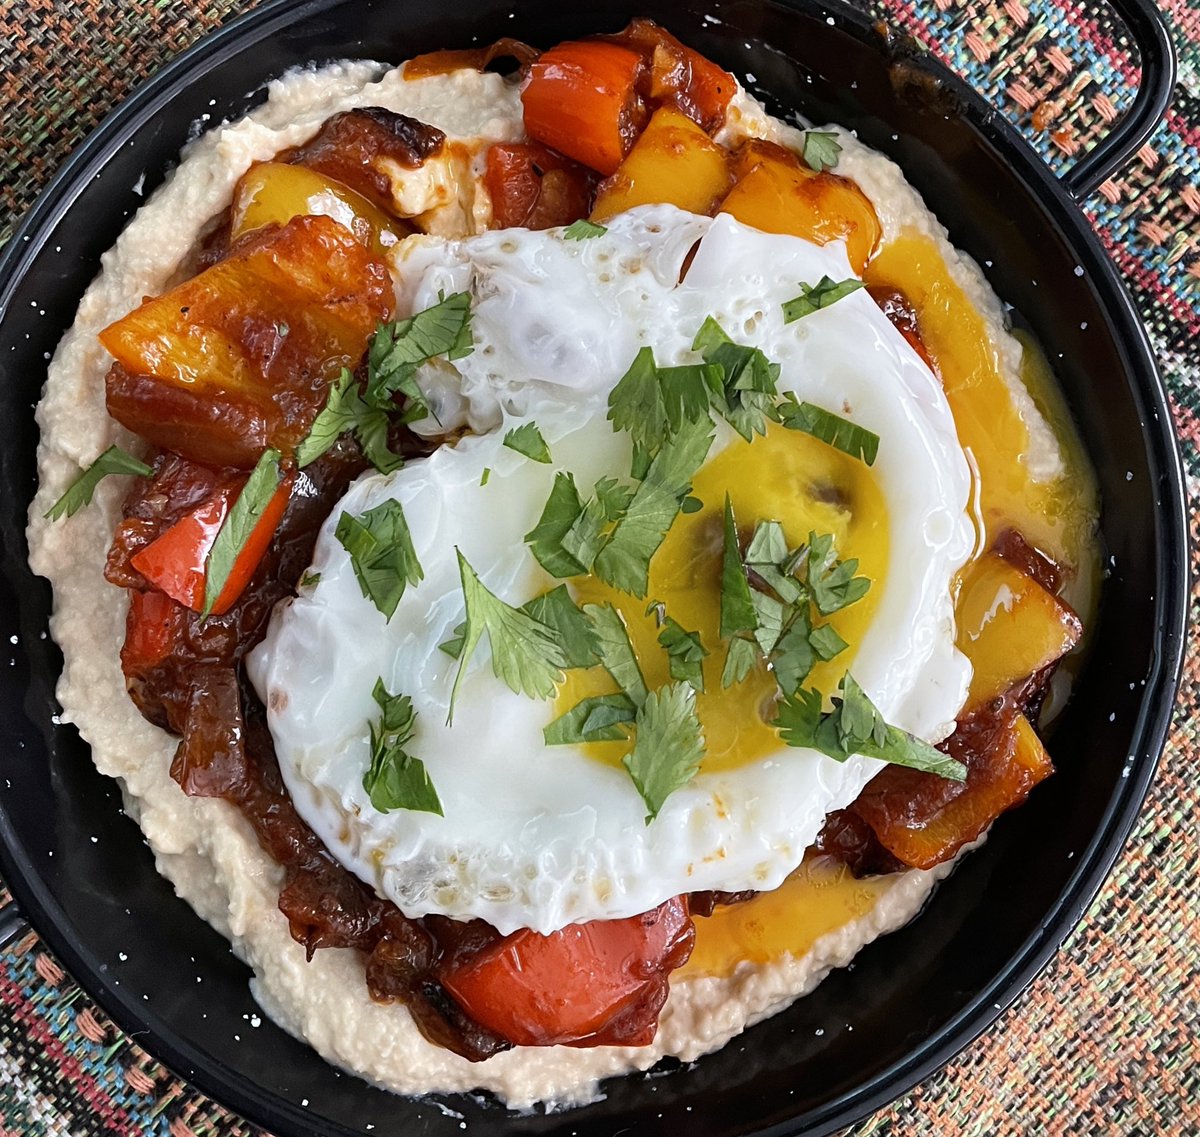 Happy #NationalHummusDay See link below for one of my favorite toppings for #hummus — #shakshouka! From my @jewishsf #recipe column. Leave a reply below with YOUR favorite hummus topping! jweekly.com/2022/05/12/cel…